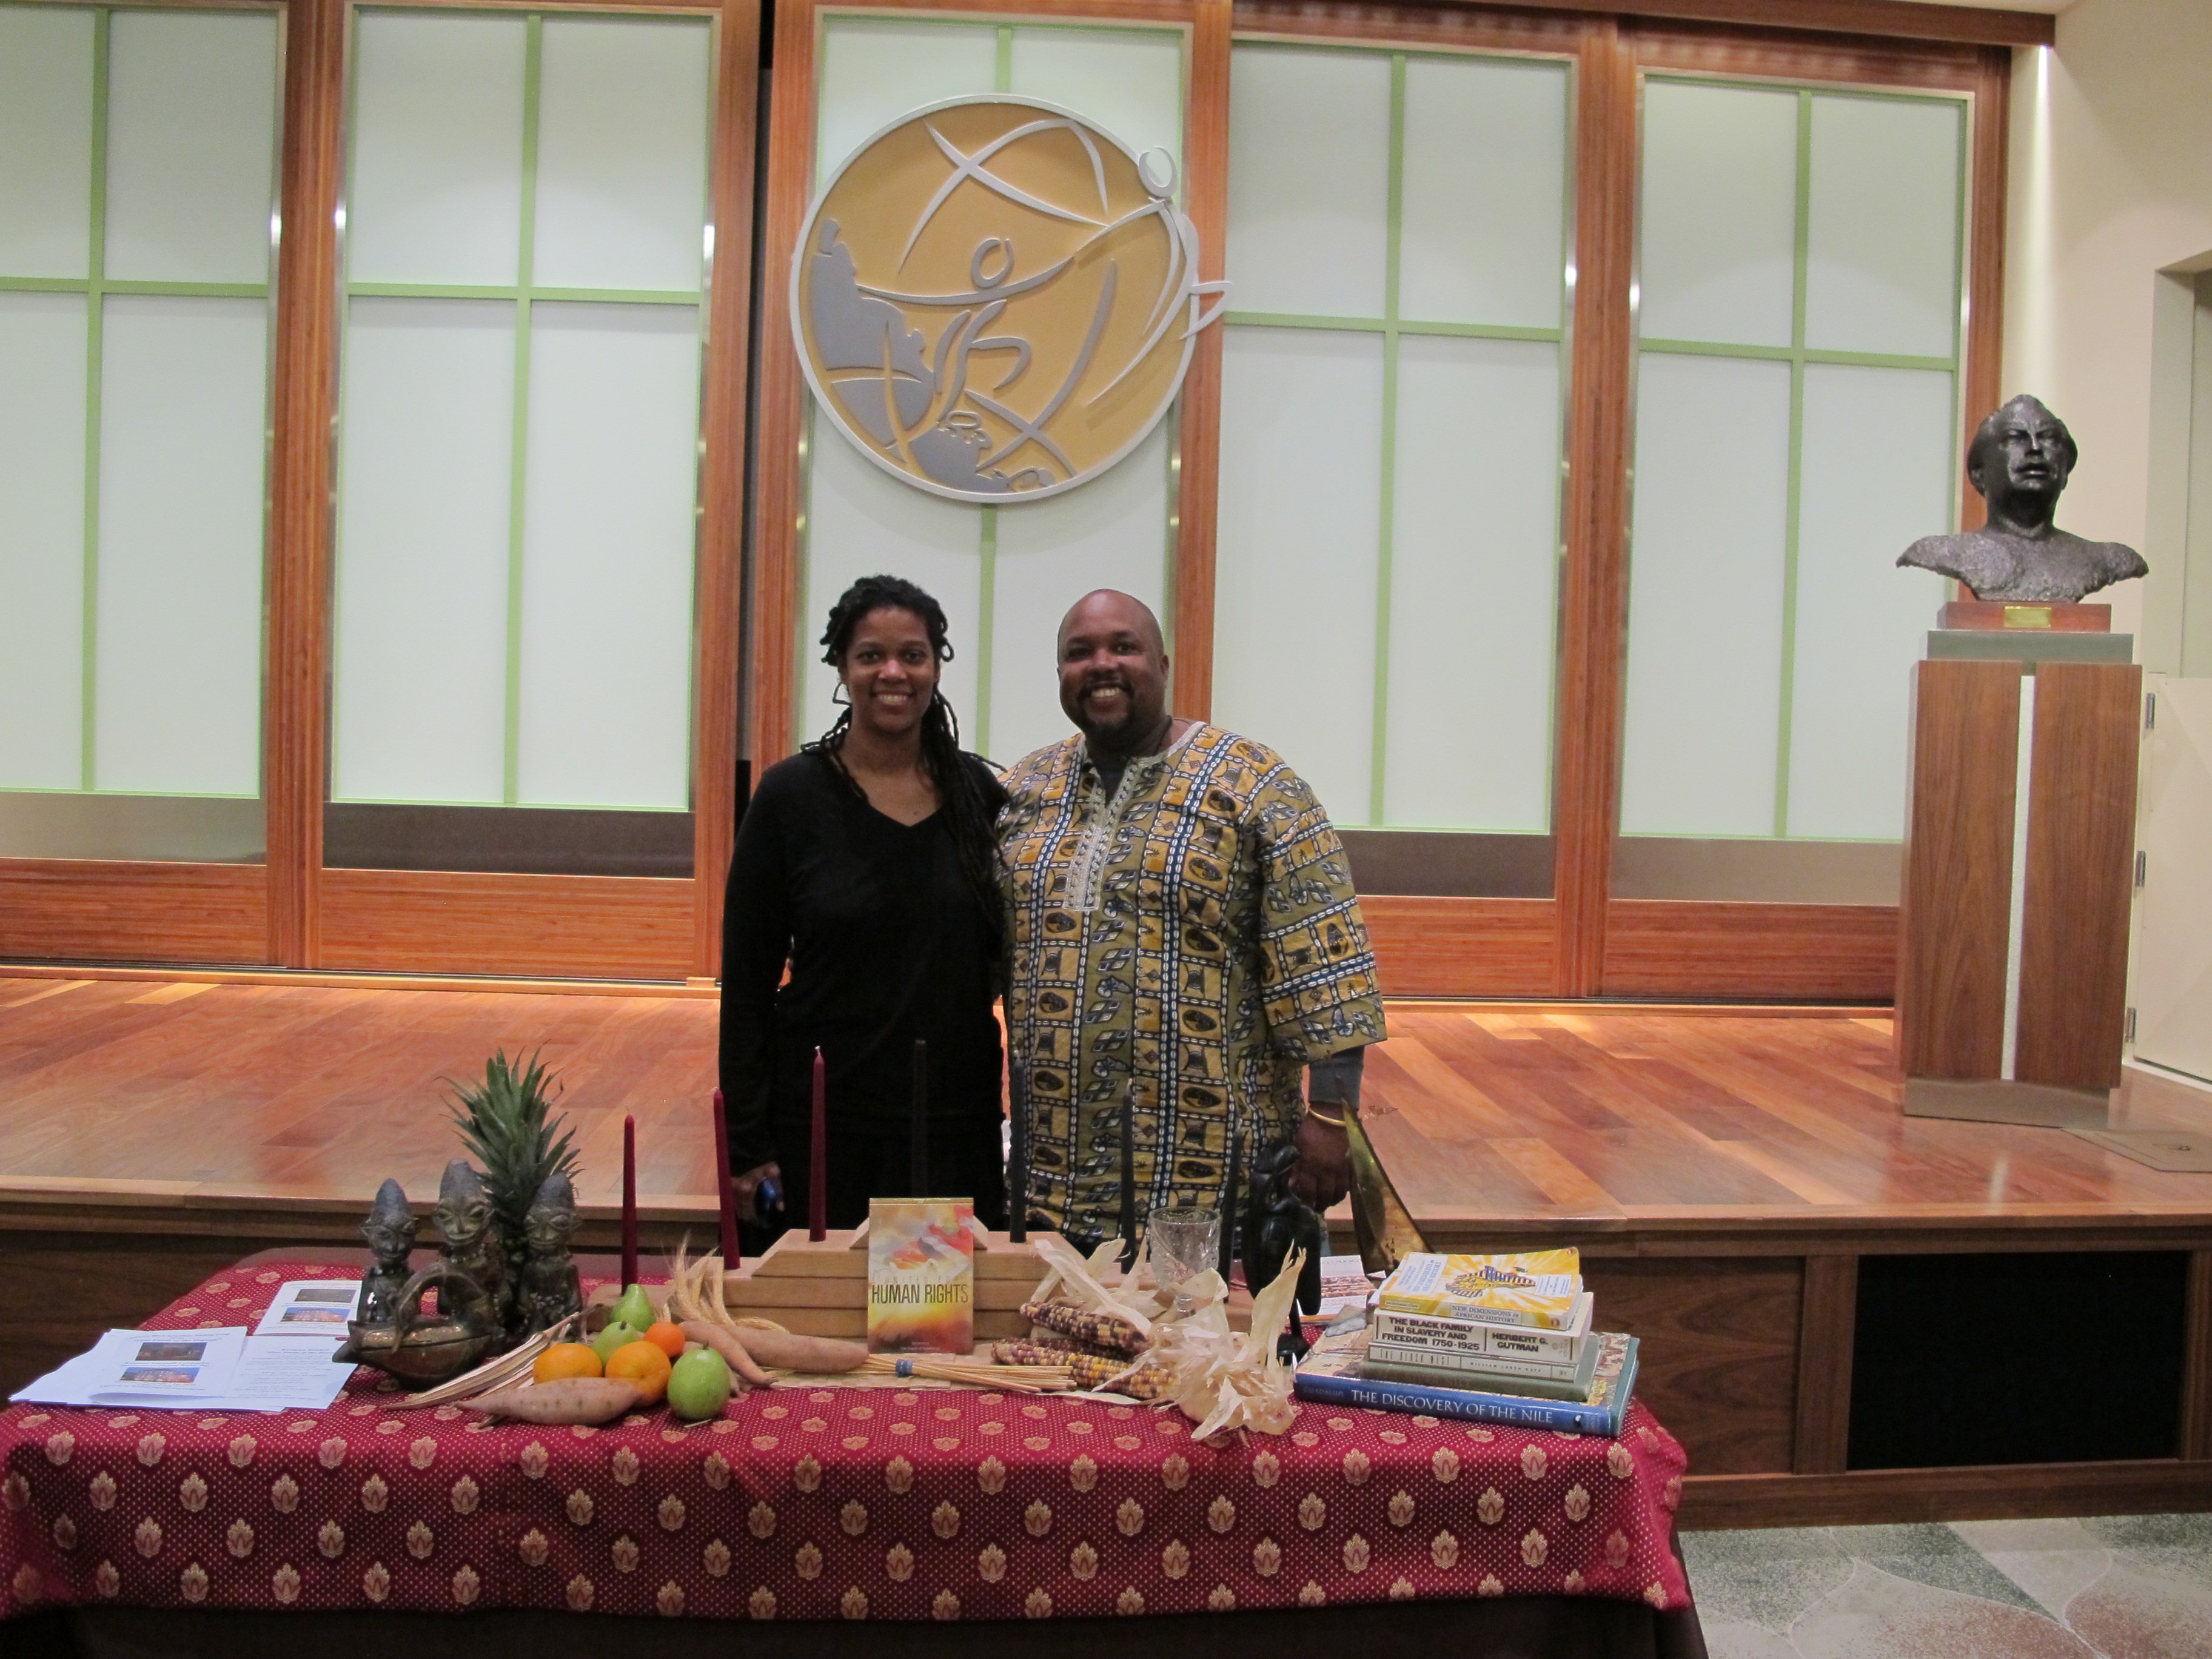 Coordinator Michael Harris will take the Kwanzaa celebration to the State Capitol on December 26th, noon - 2:00 pm.